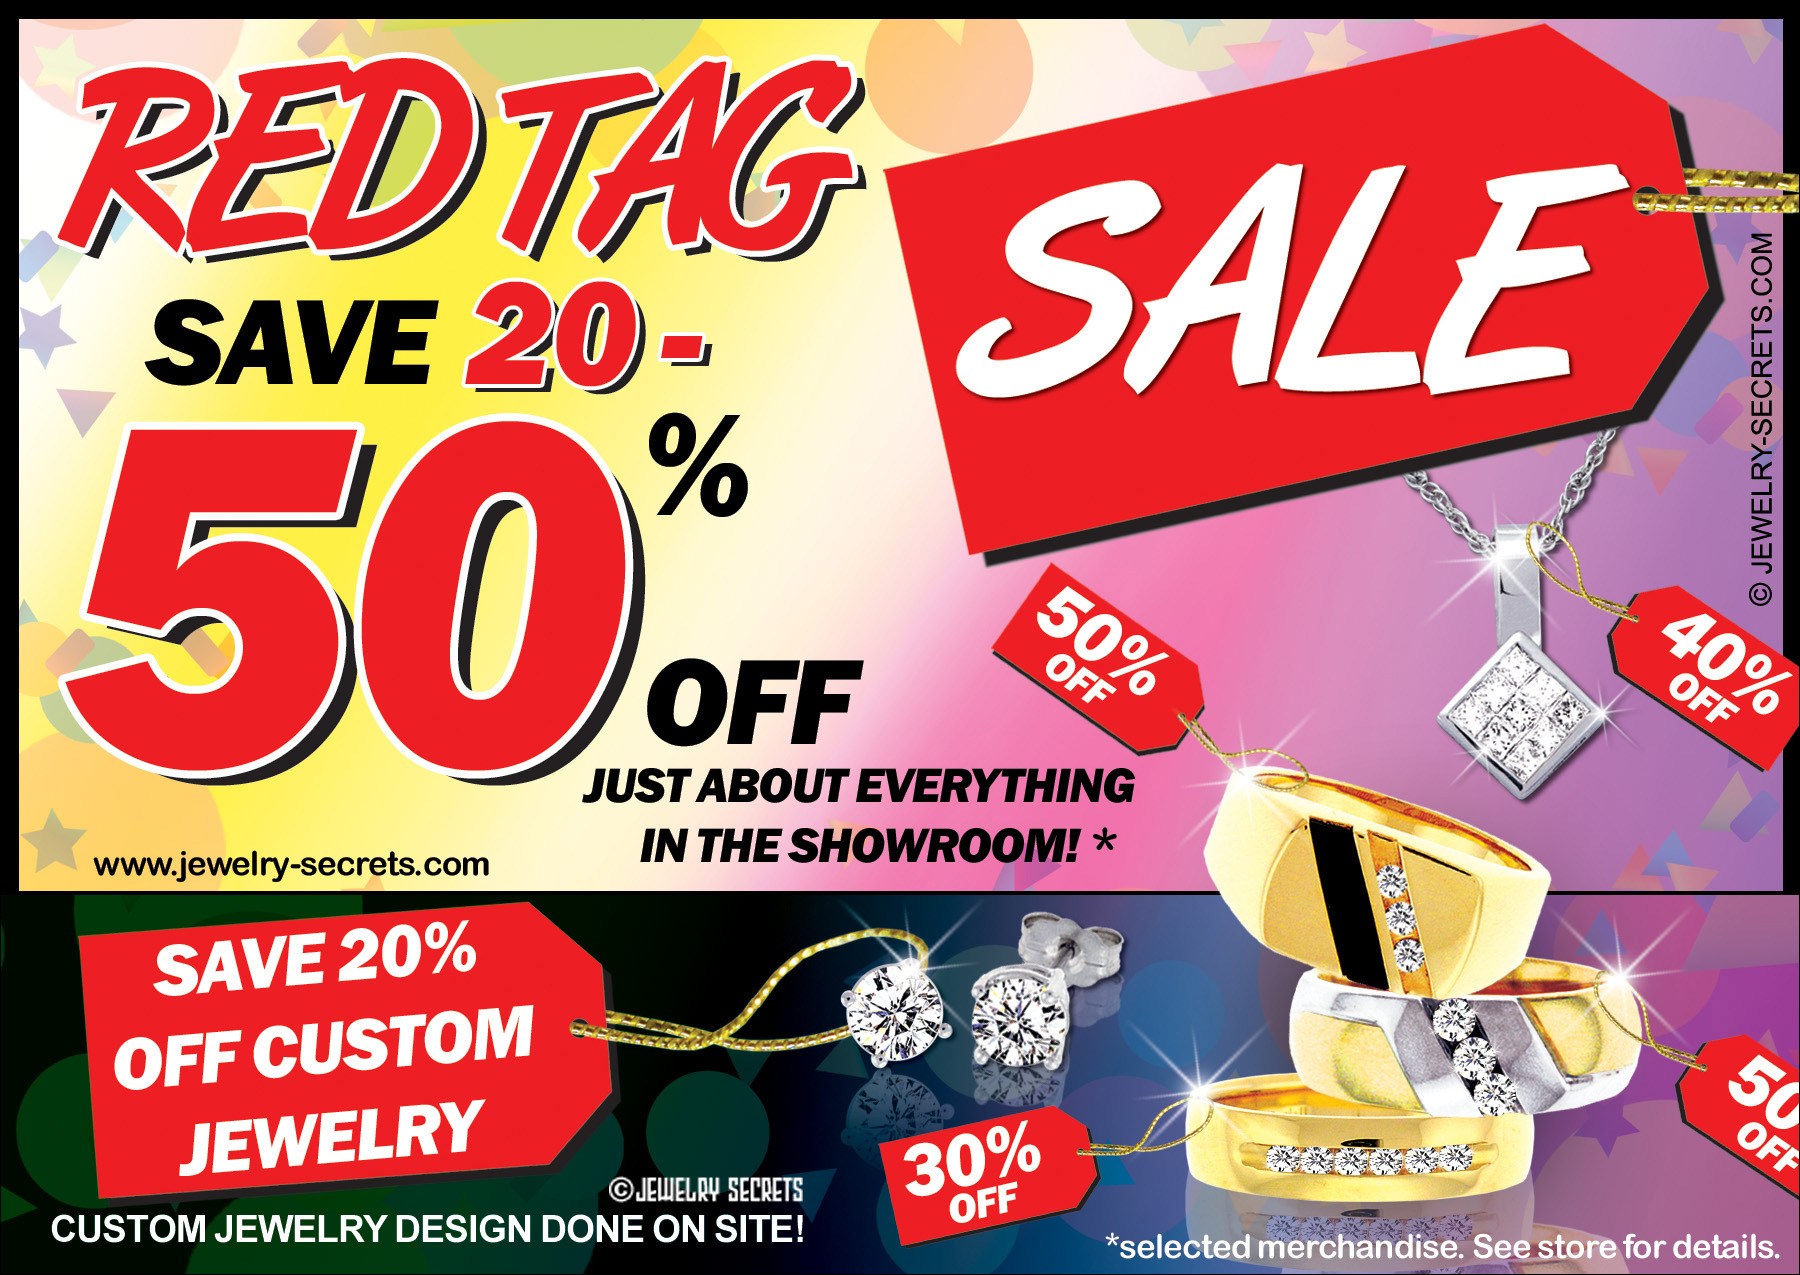 JEWELER'S RED TAG INVENTORY SALE SAMPLE ADVERTISEMENT 